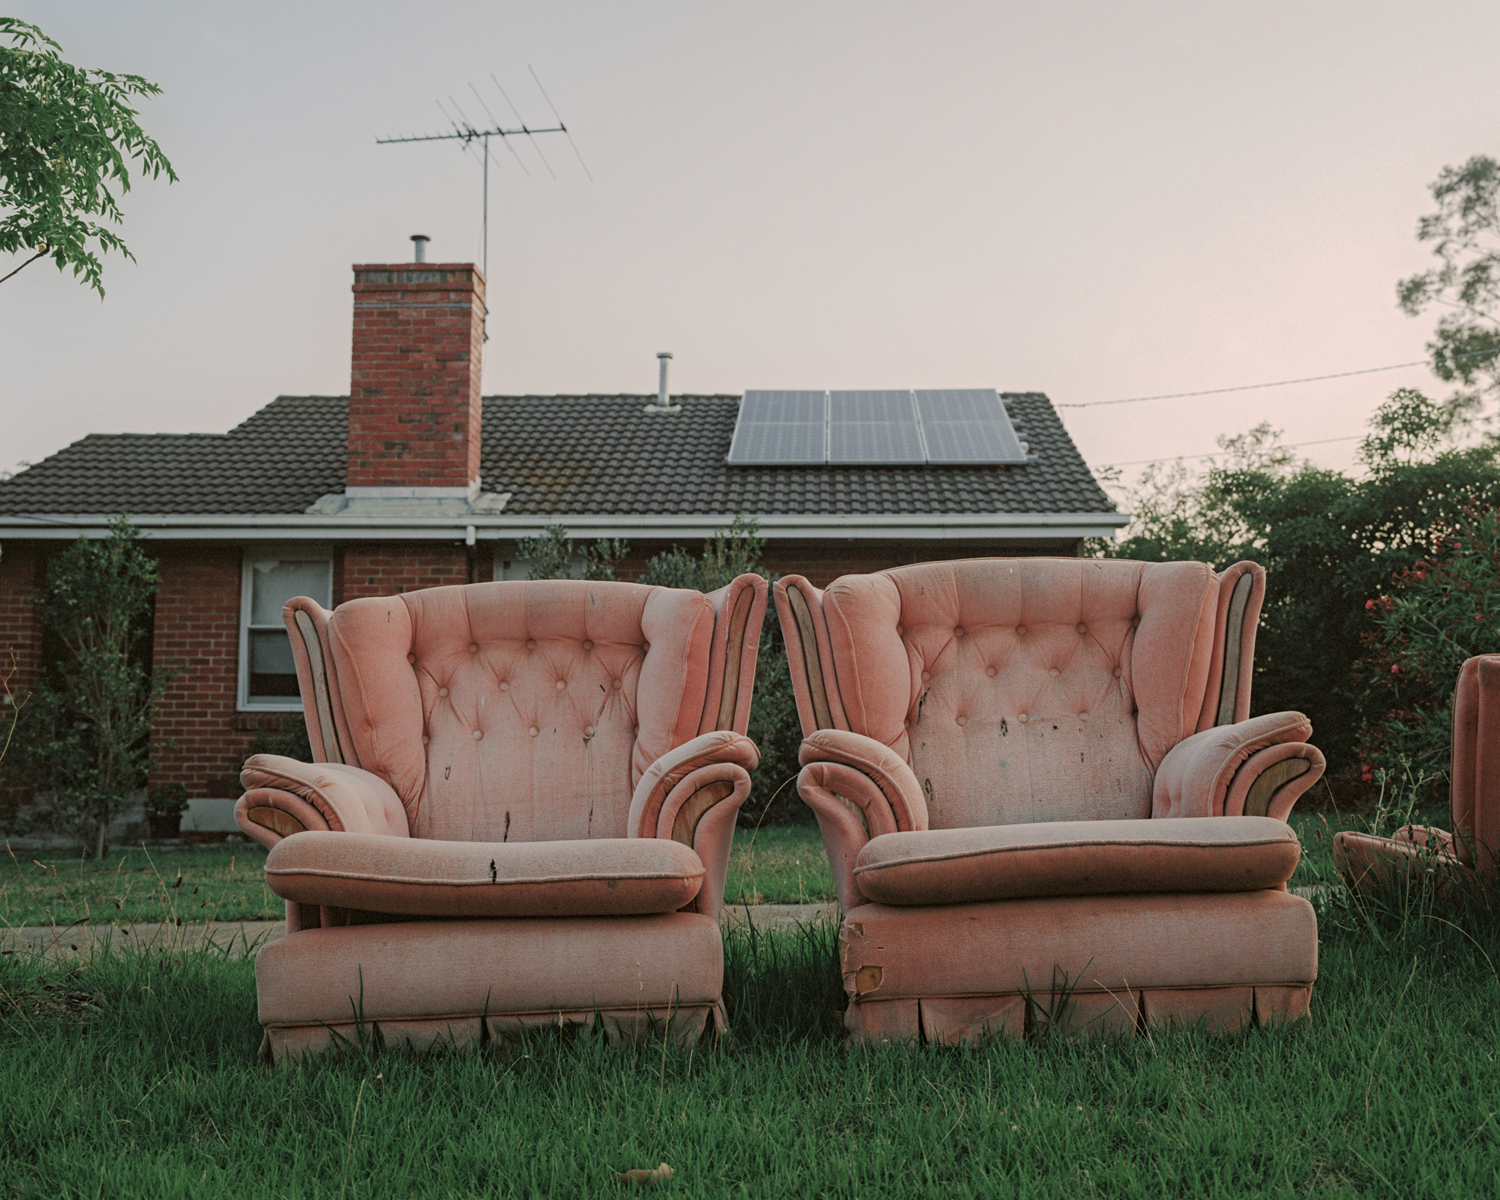 Colour photograph depicting two pink sofas at sunset.